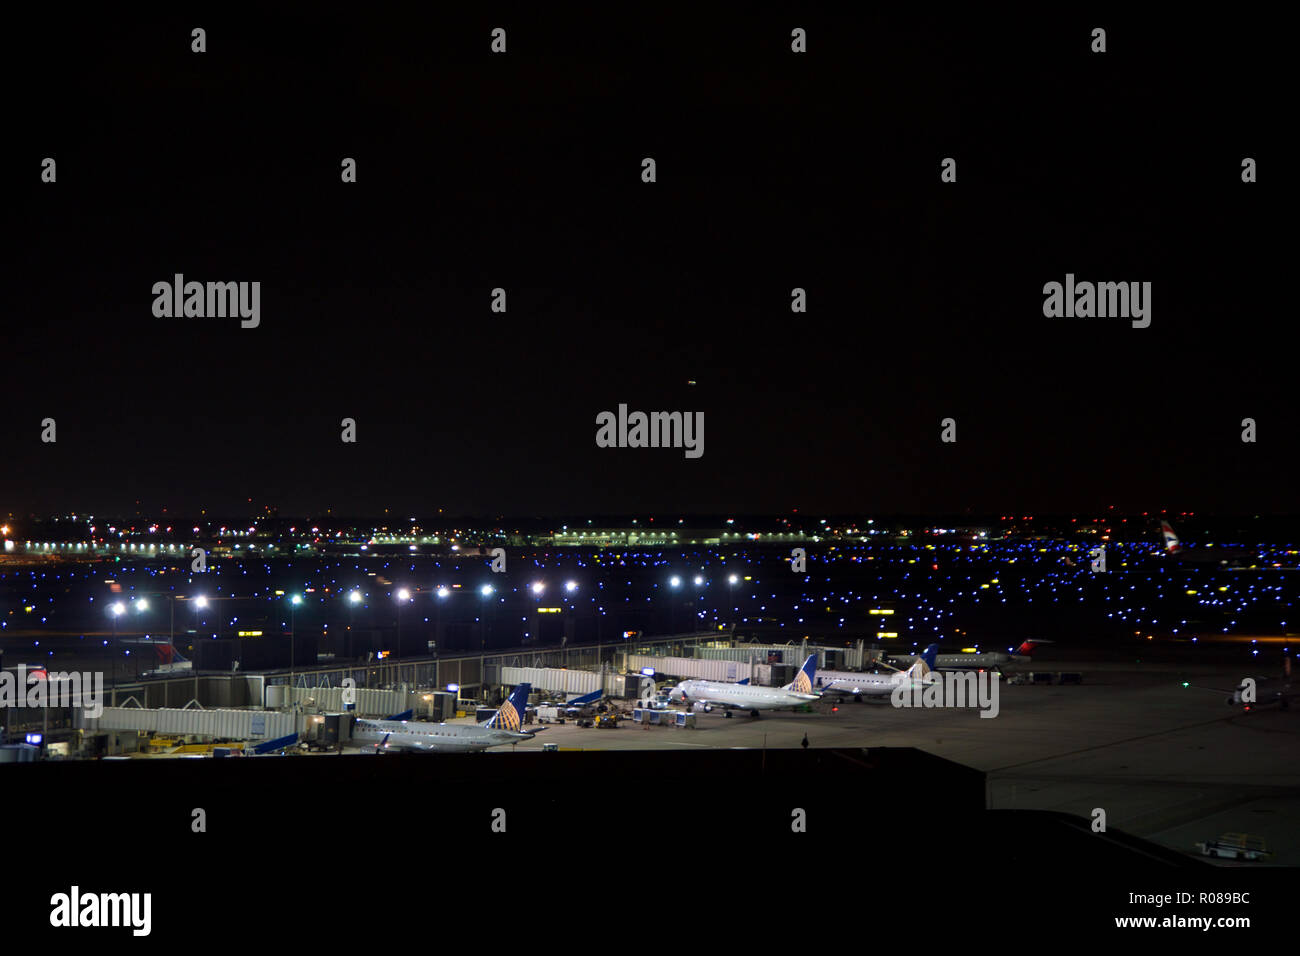 CHICAGO, ILLINOIS, UNITED STATES - MAY 11th, 2018: Several airplanes at the gate at Chicago O'Hare International Airport at night. Stock Photo